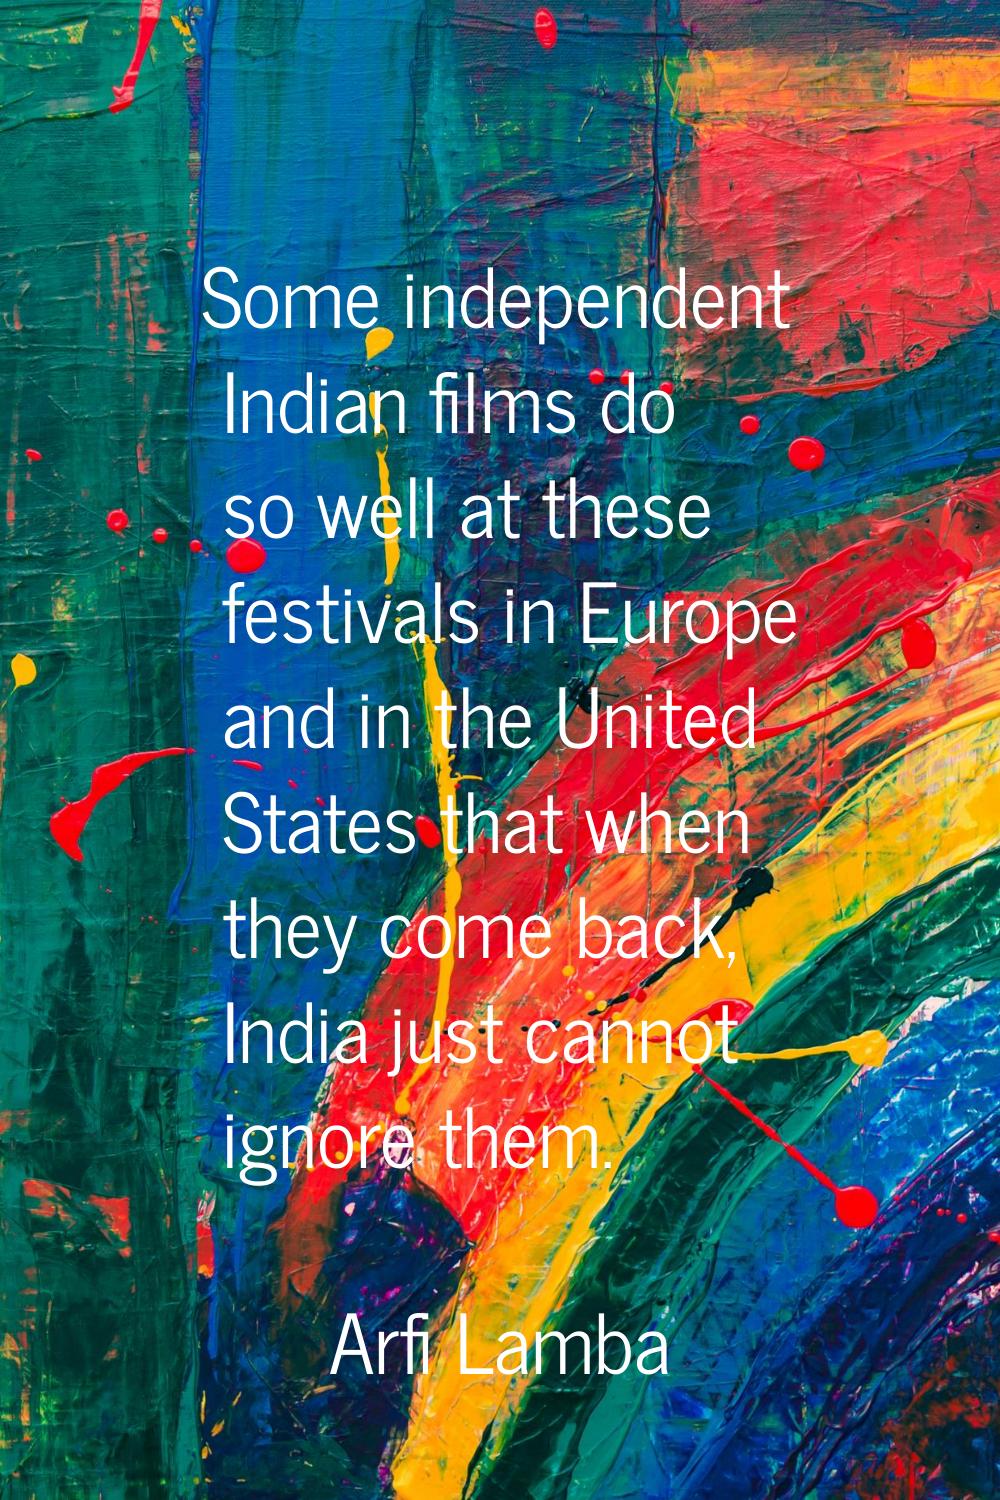 Some independent Indian films do so well at these festivals in Europe and in the United States that